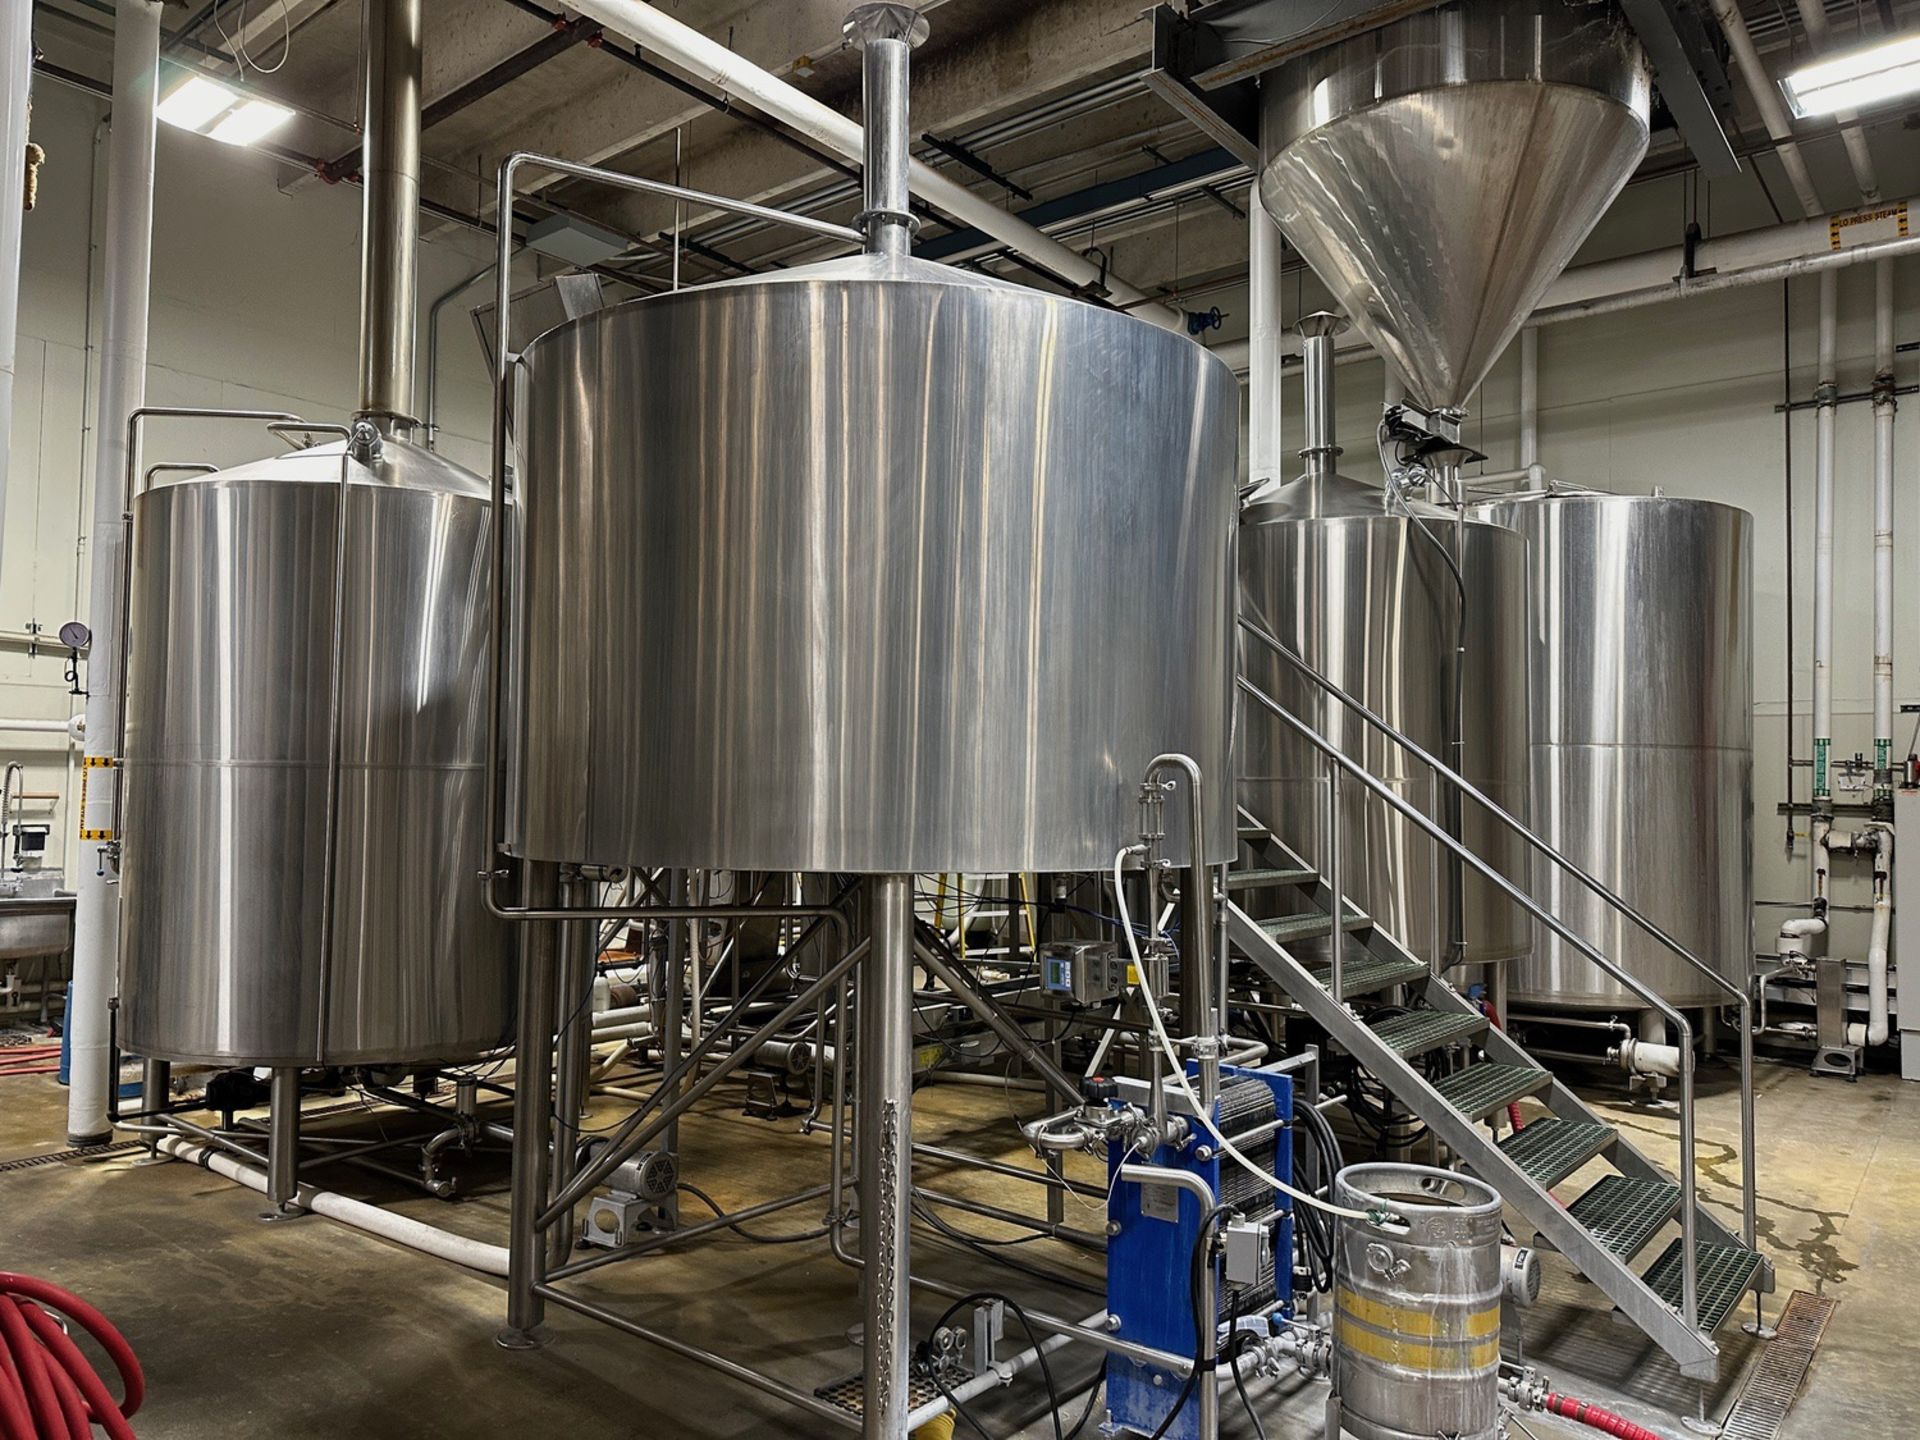 Newlands 4-Vessel 40 BBL Stainless Steel Brewhouse - Mash Mixer (Approx. 7' Diamete | Rig Fee $8500 - Image 2 of 35